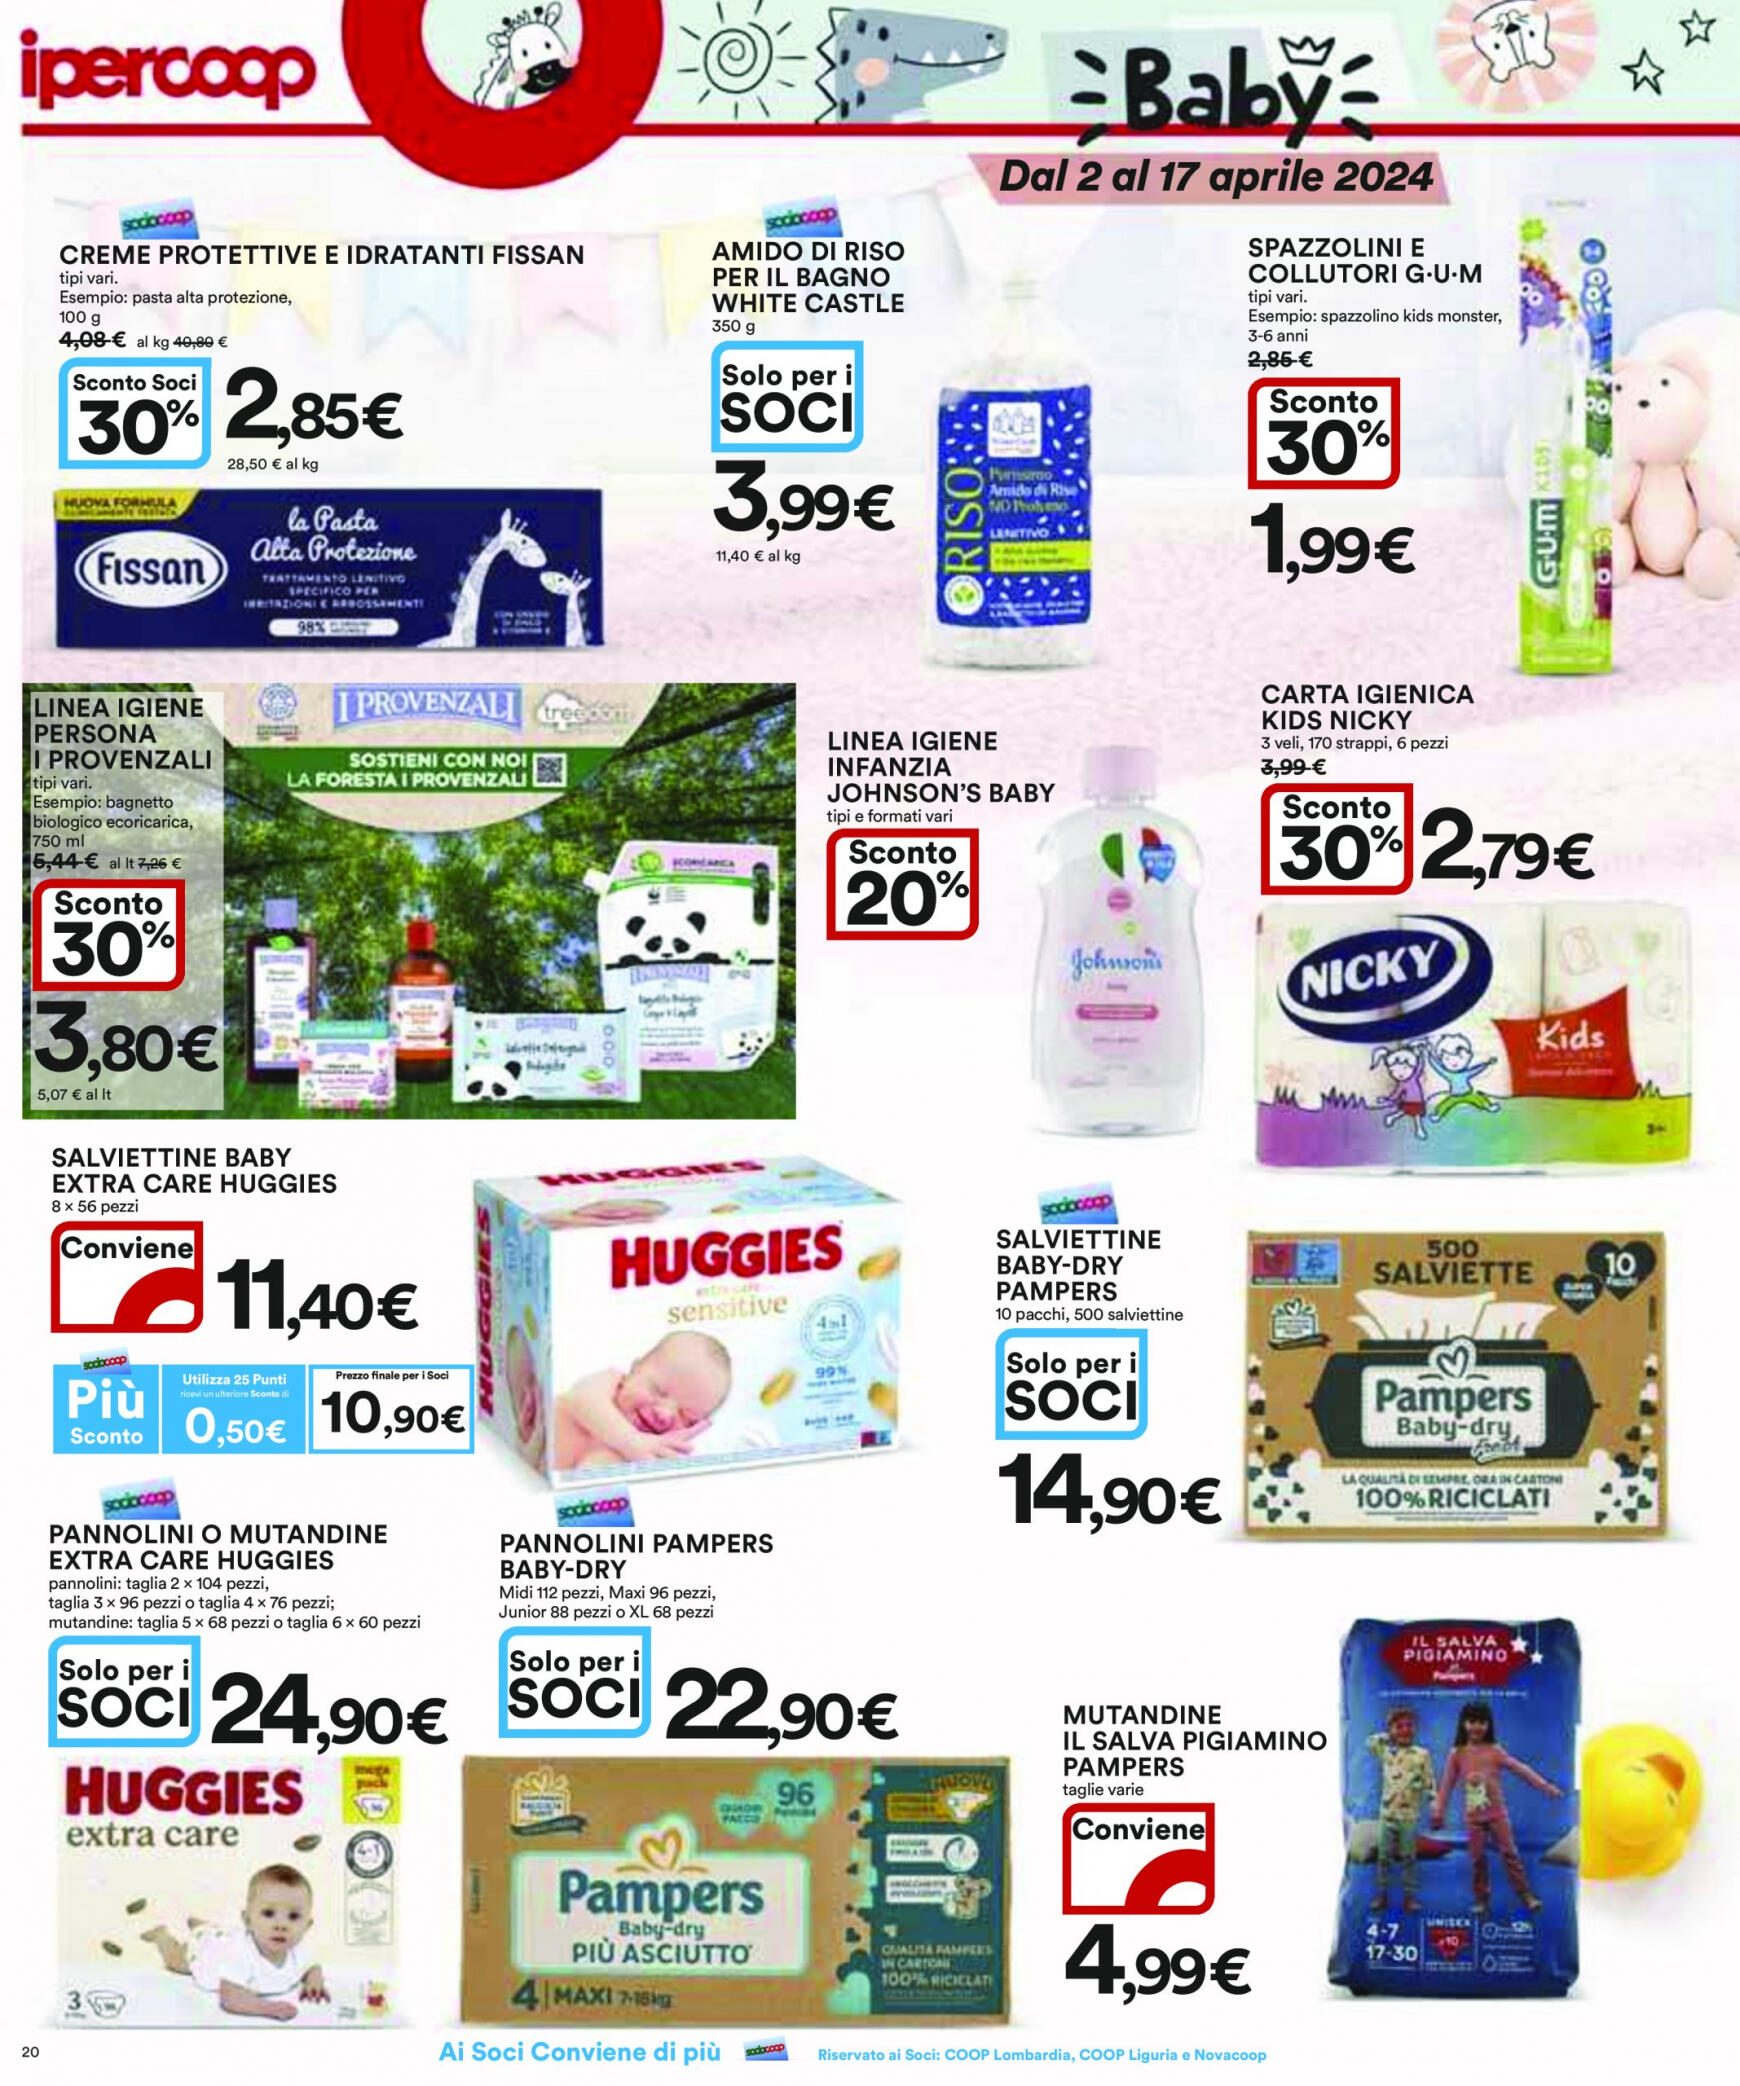 coop - Nuovo volantino Coop 02.04. - 17.04. - page: 20